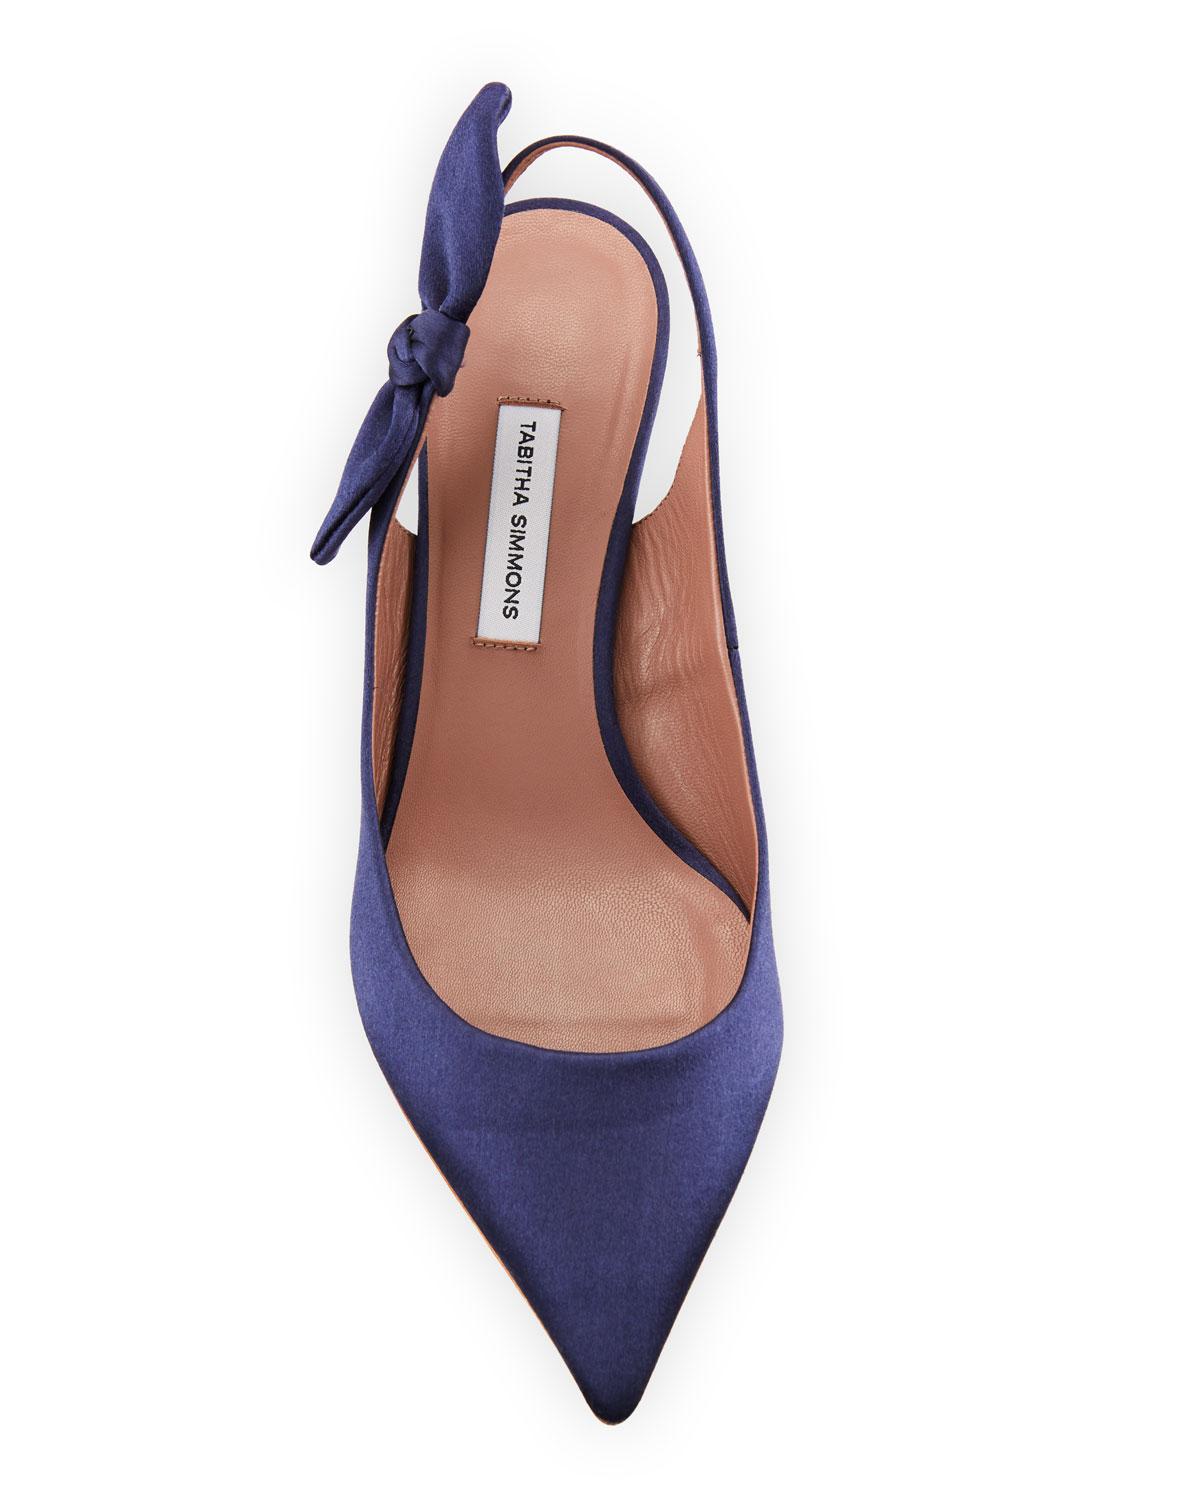 Tabitha Simmons Rise Satin Slingback Pump With Bow in Blue 